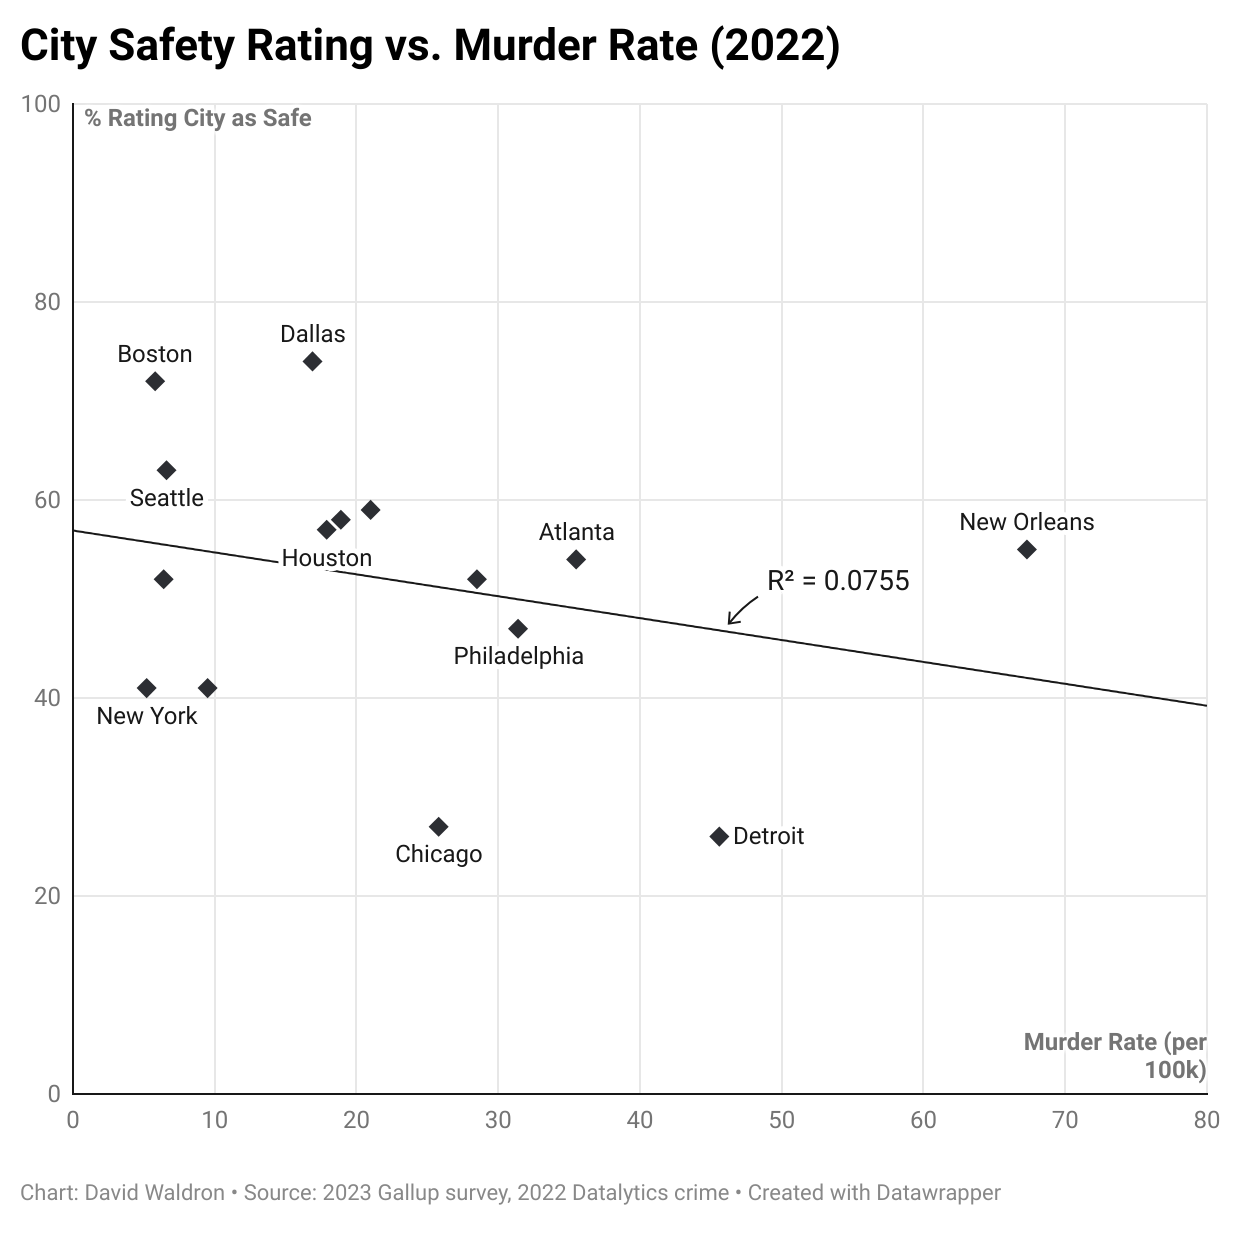 Scatter plot of 2022 city crime rate vs percent of people rating city as safe to live in